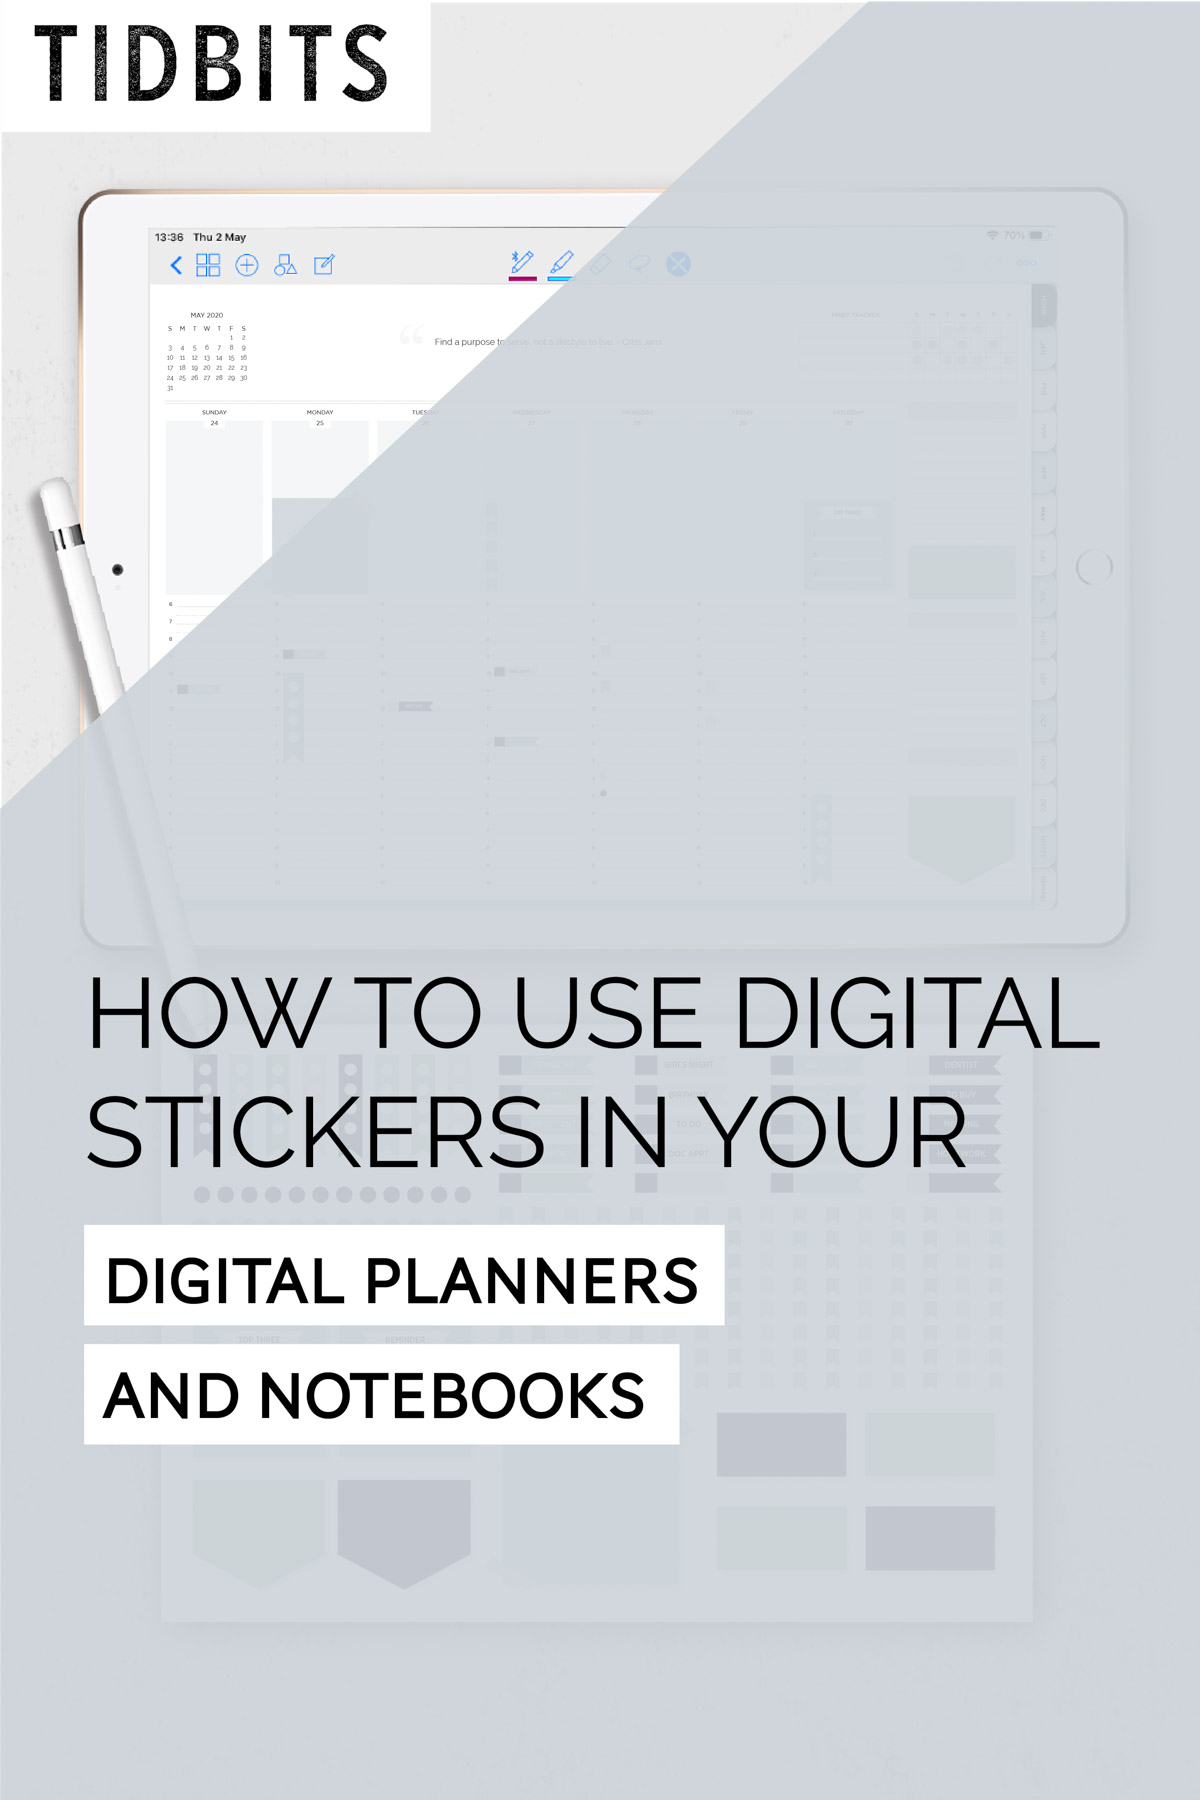 How to use digital stickers in your digital planners and notebooks.